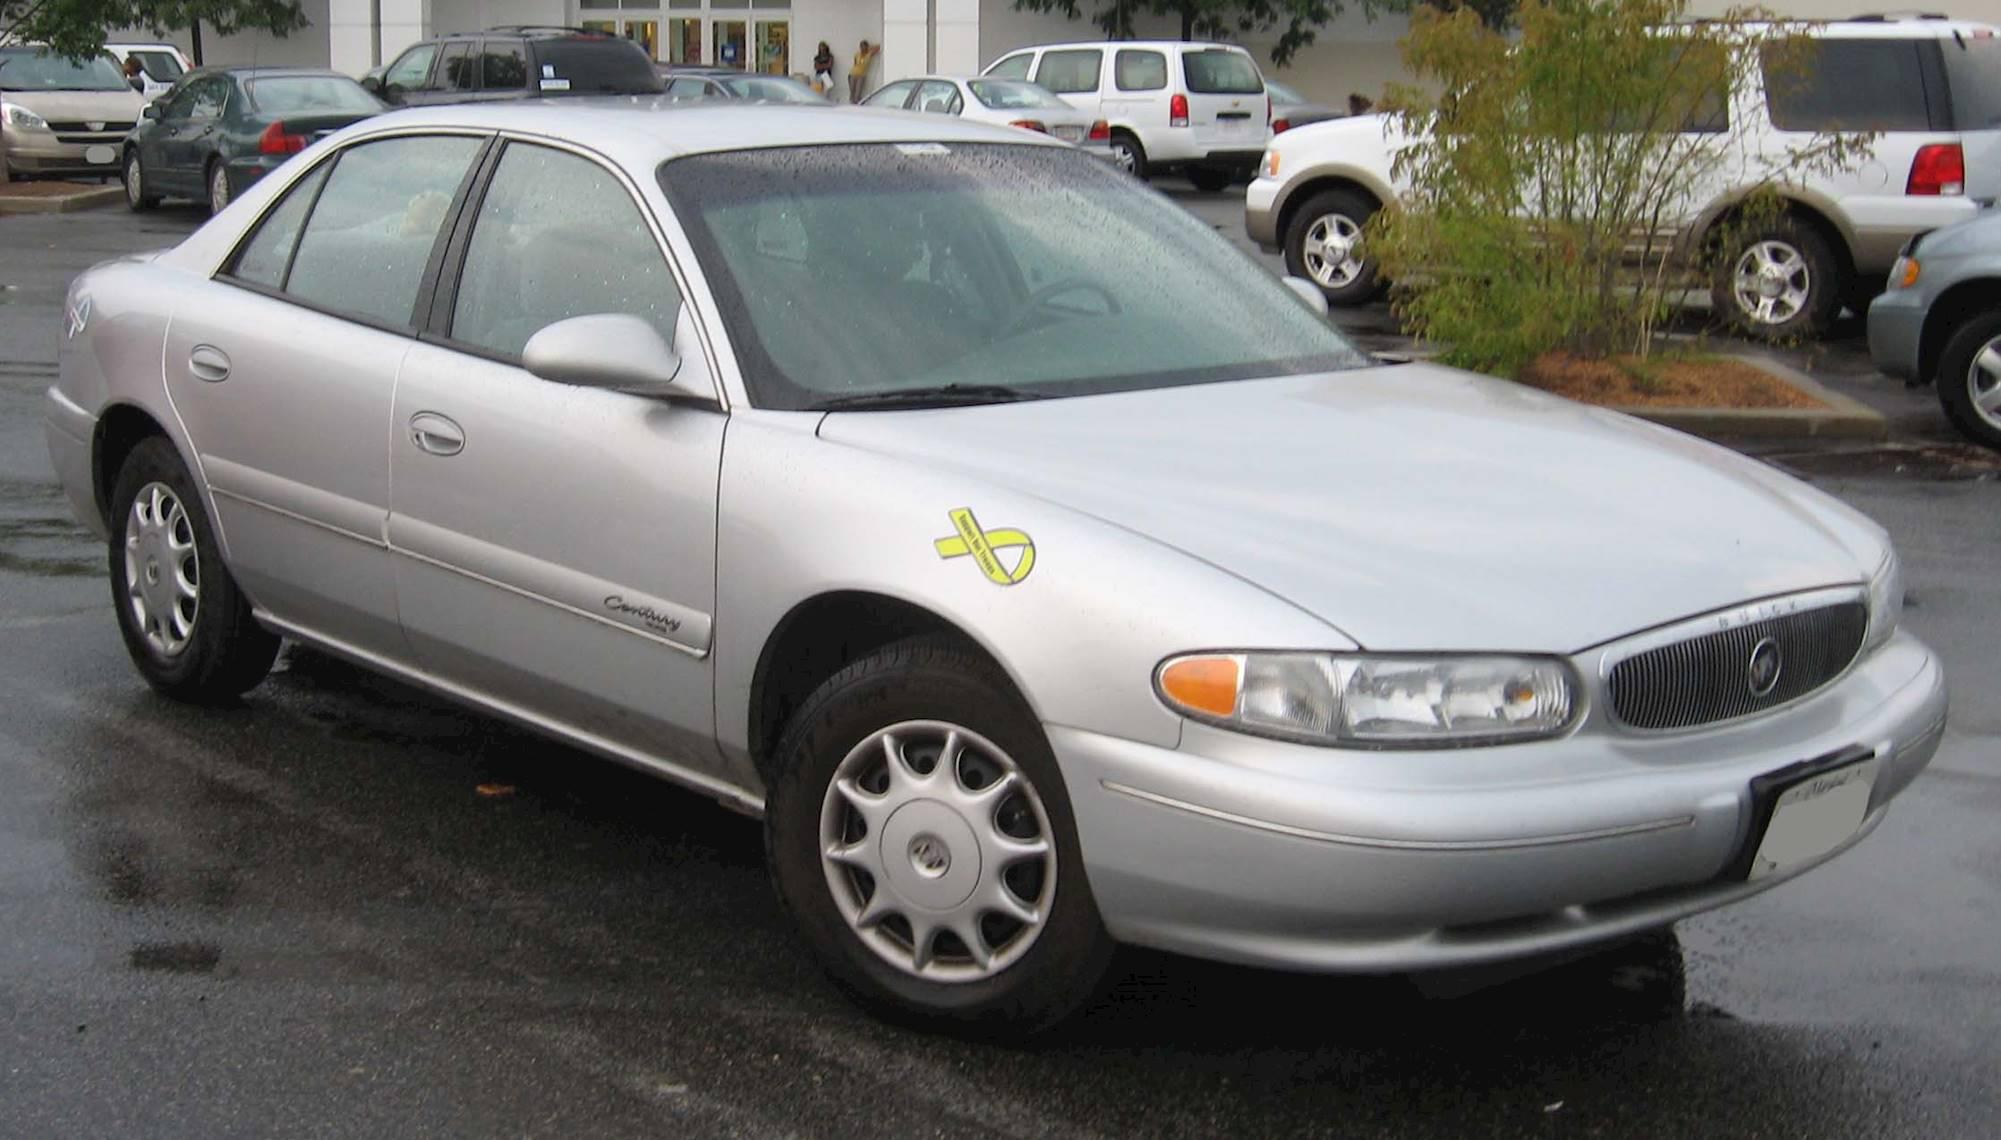 1997 Buick Century, Either has 50k miles and is in mint condition, or 300k  and comes included with cigarette stains, holes, meth, meth pipe, pocket  knife, coke can with cigarette butts, and